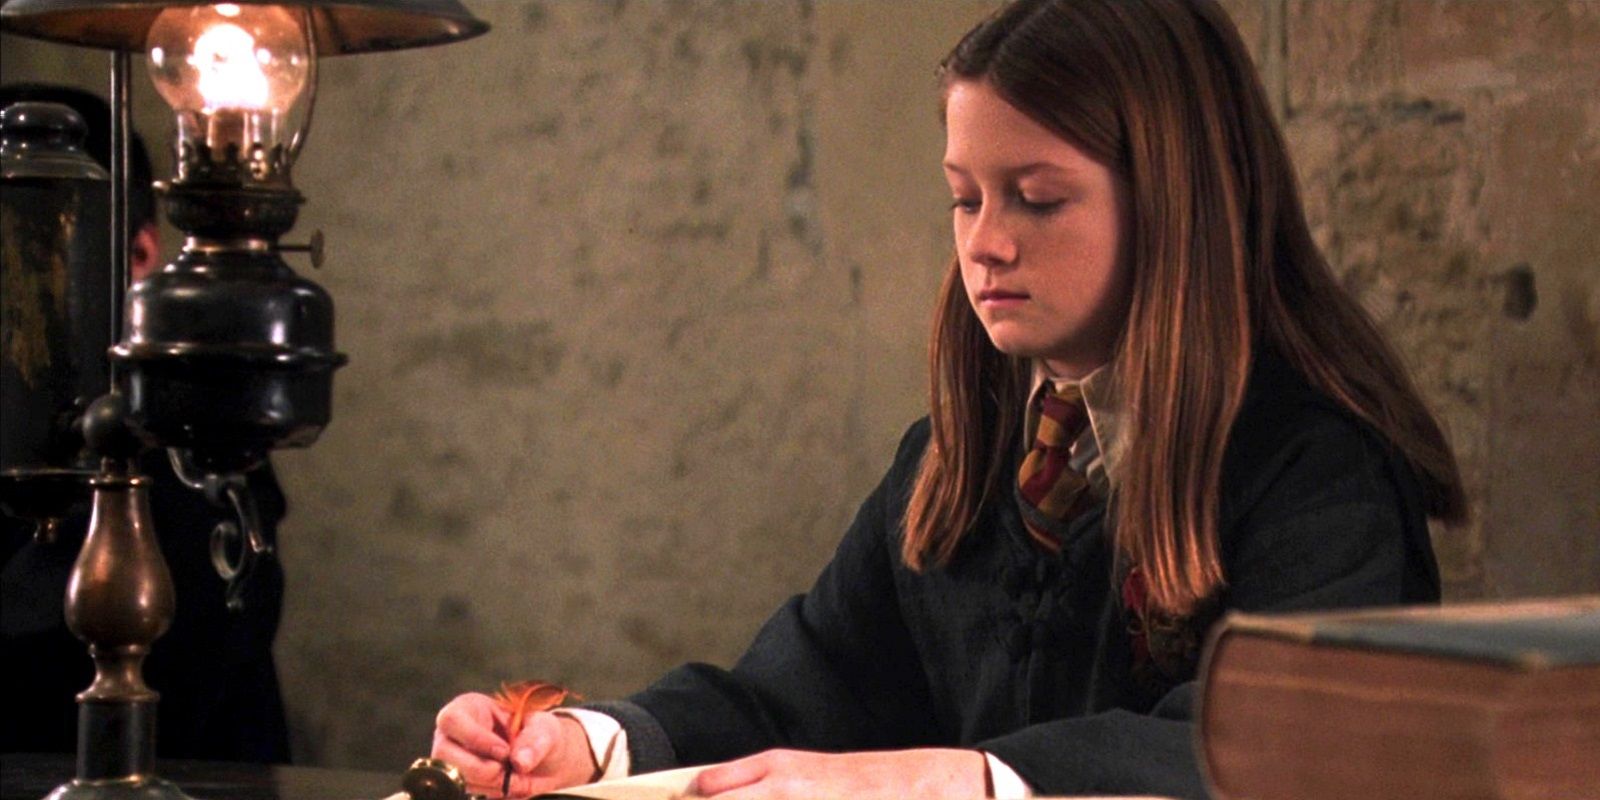 Harry Potter 5 Most Inspirational Ginny Weasley Scenes (& 5 Where Fans Felt Sorry For Her)